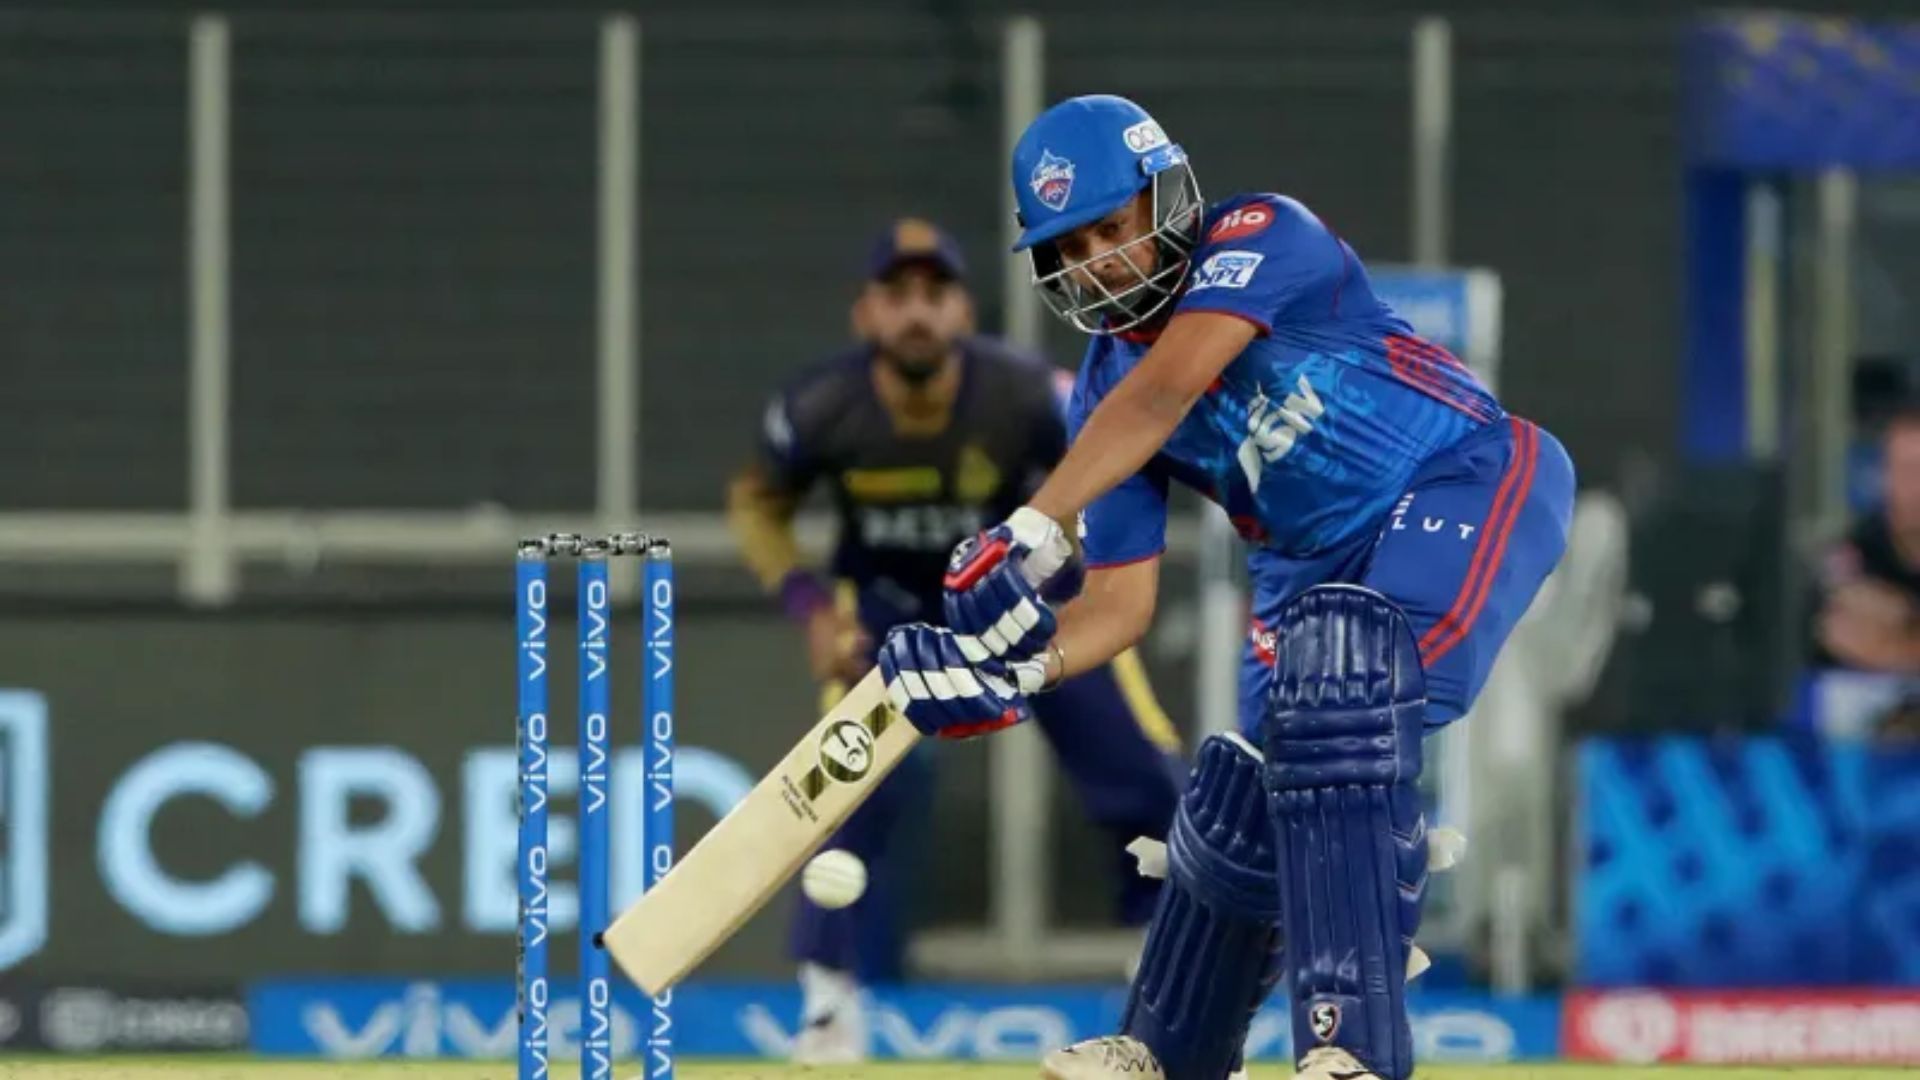 We have seen some brilliant knocks from Prithvi Shaw in the IPL. (Image Courtesy: iplt20.com)